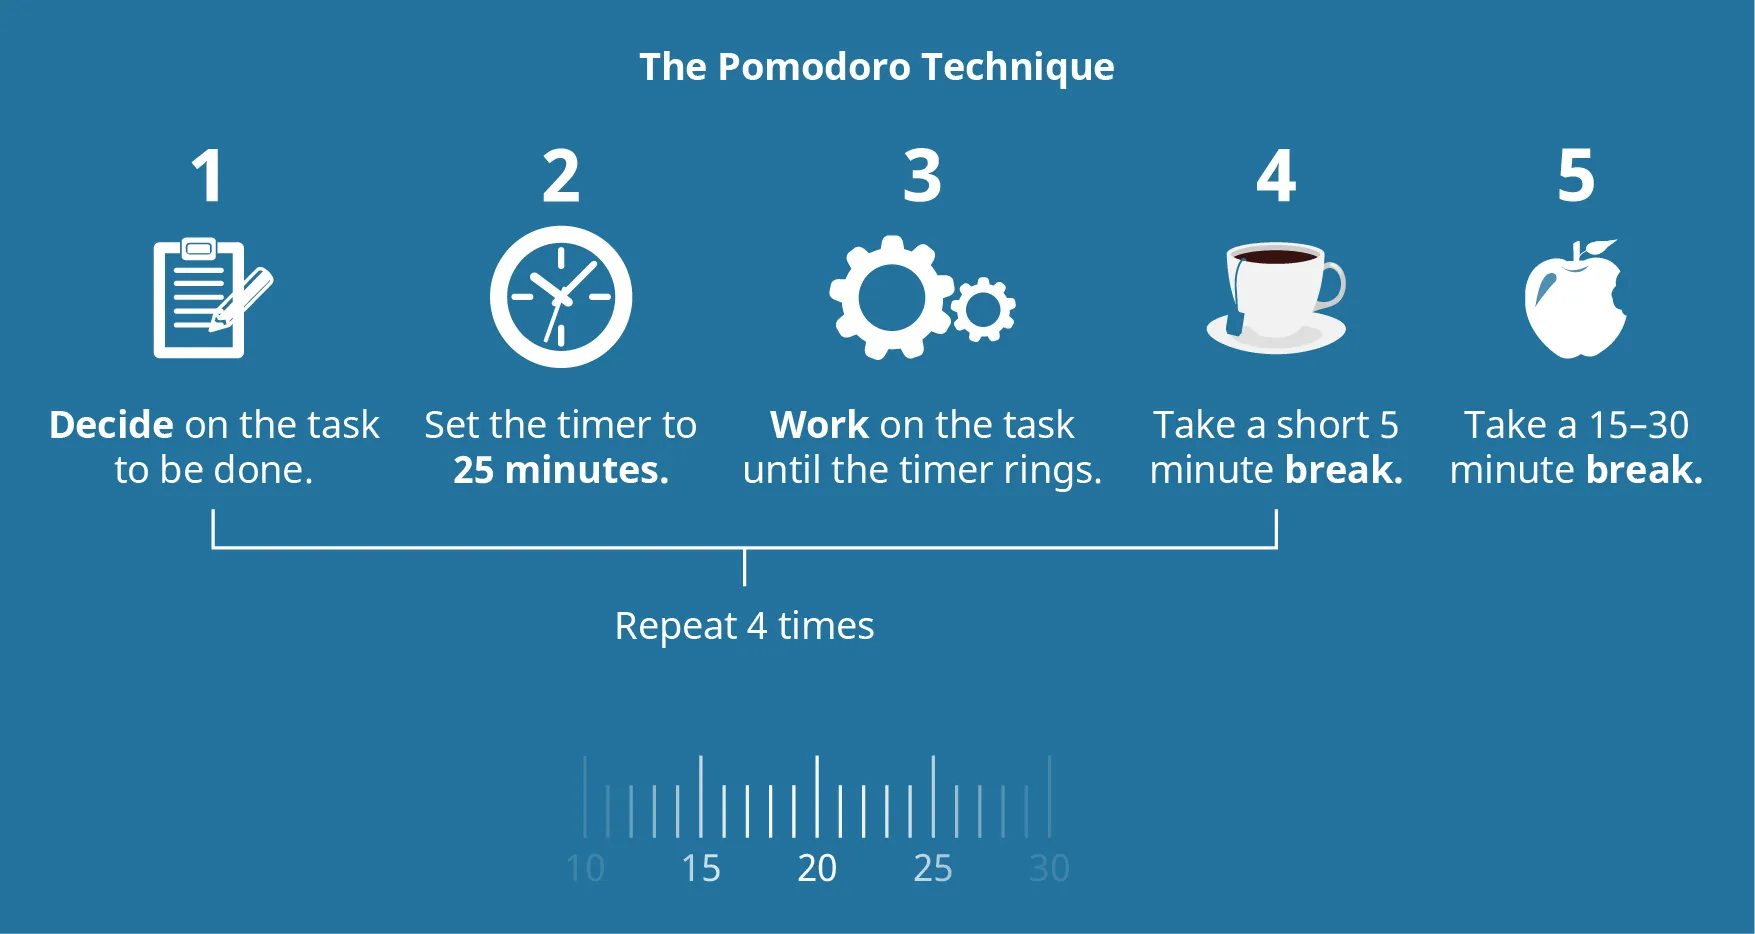 Image of a blue chart with the steps of the Pomodoro technique, as listed above and illustrated with 1. A checklist, 2. A clock, 3. Gears, 4. Coffee, and 5. An apple.